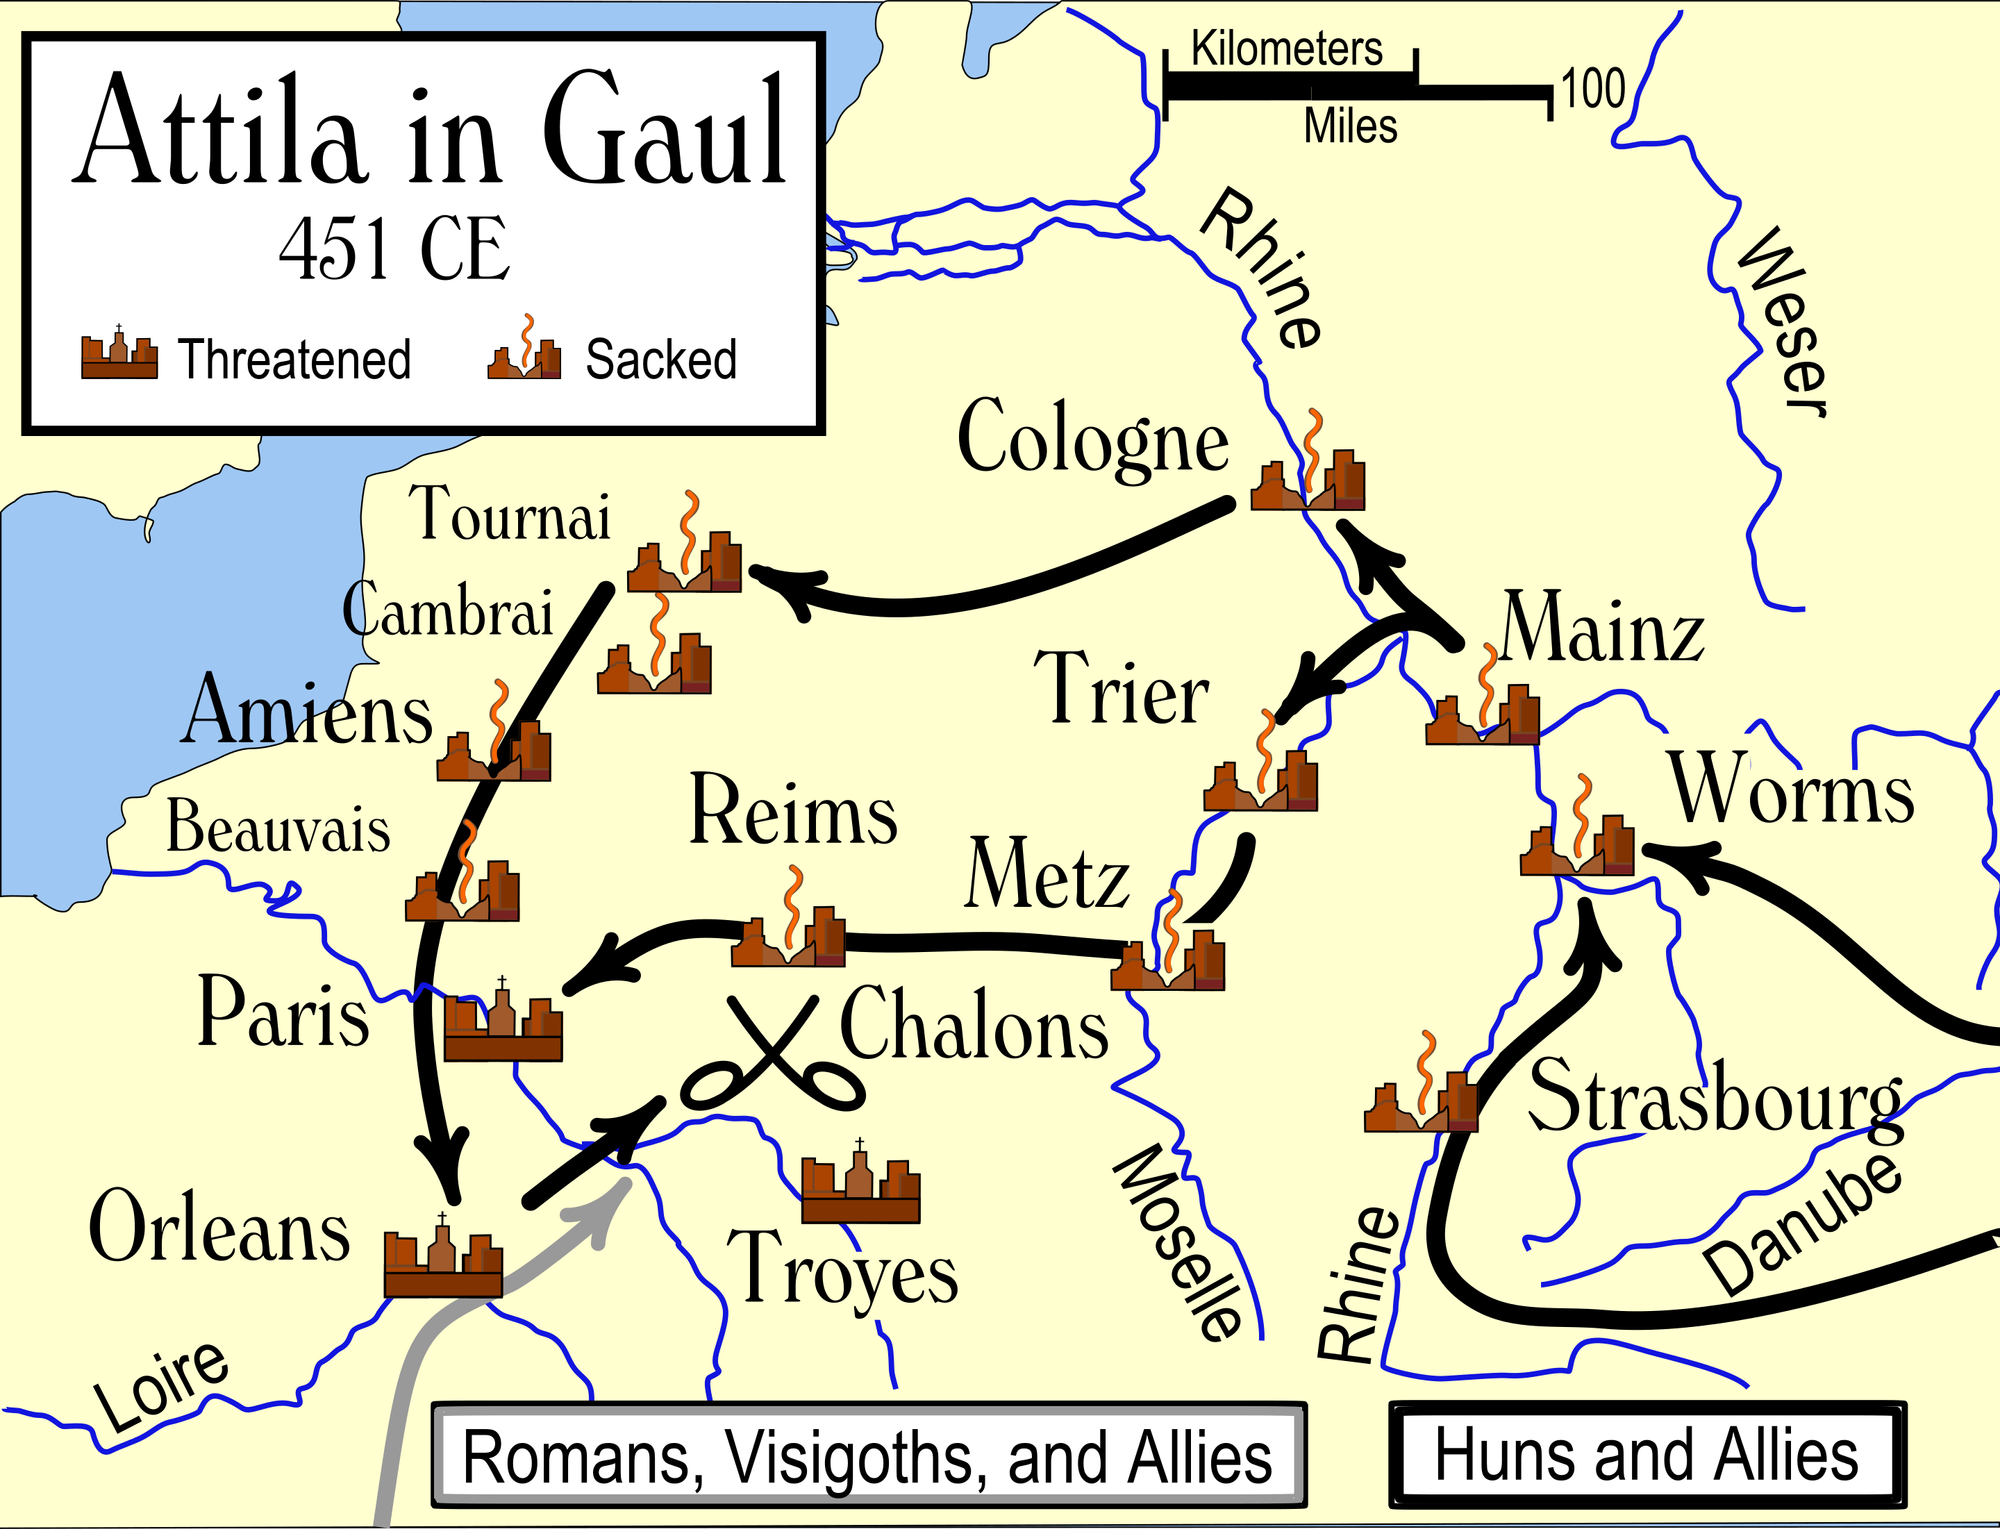 A (somewhat conjectural) Wikipedia-published map indicating the possible paths taken by Attila’s forces in 451.